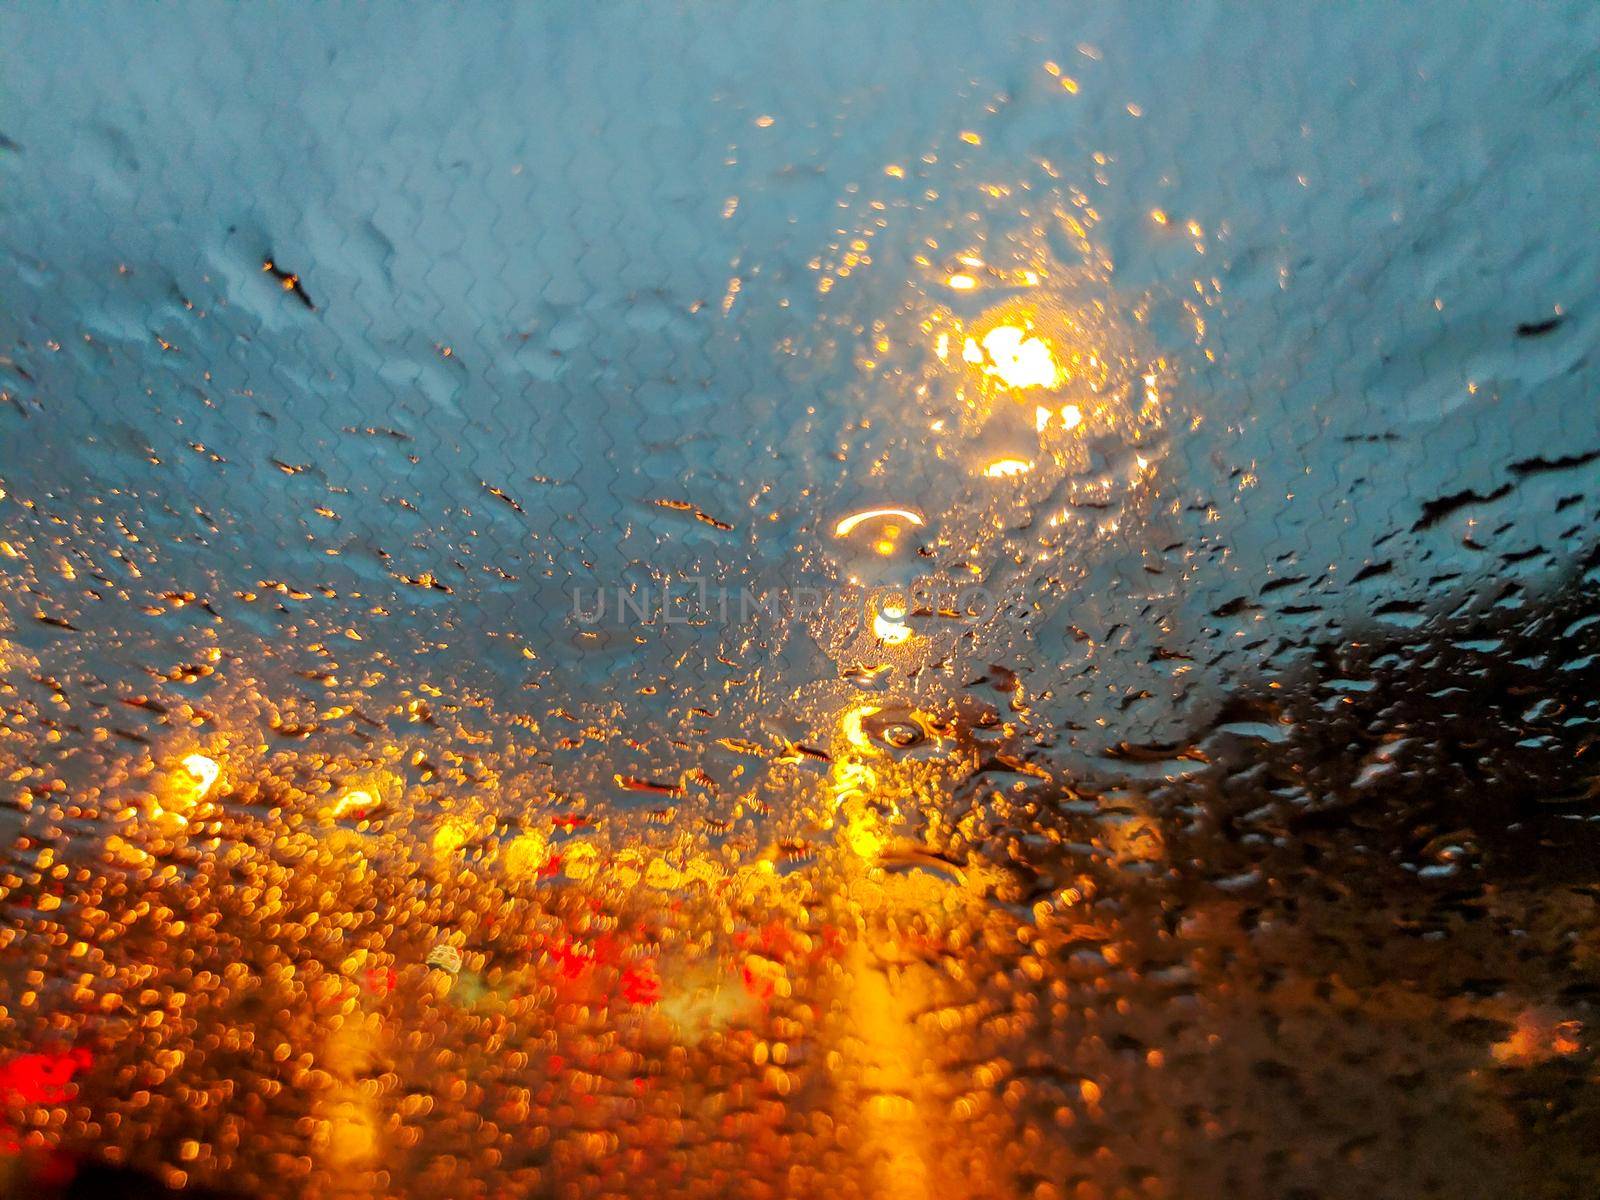 Raindrops on the windshield of the car. There is a lot of traffic, the lights of cars are reflected. by Milanchikov